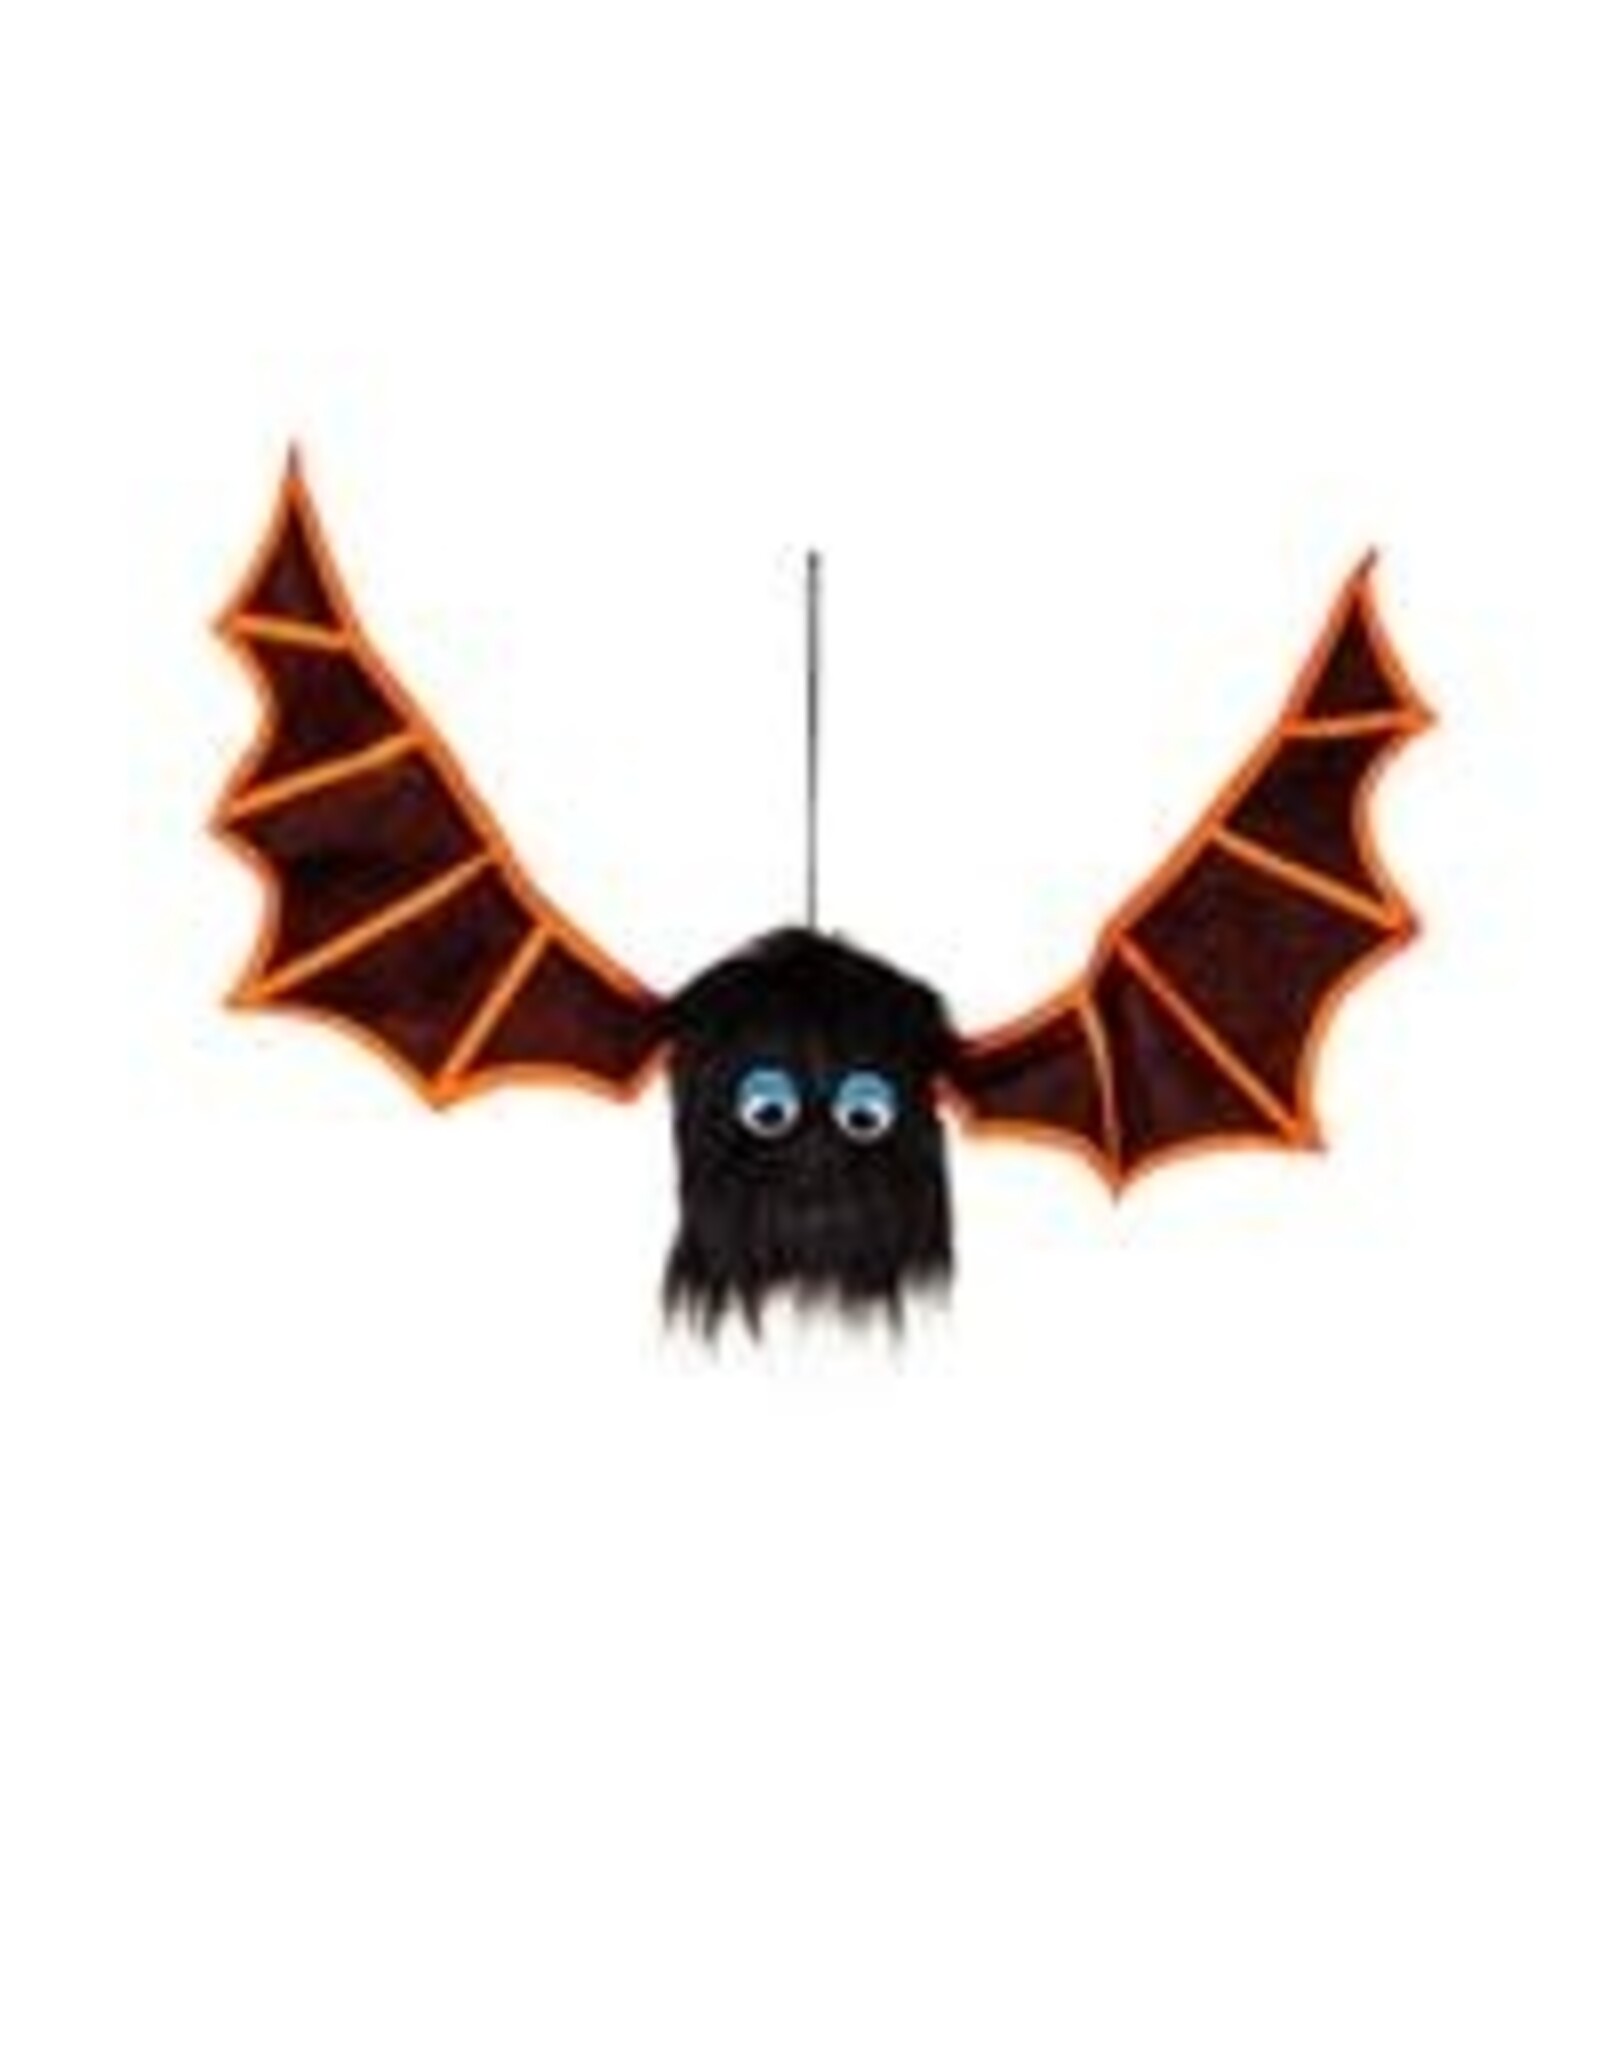 Evergreen Enterprises Animated Shaking Bats with Sound Hanging Décor